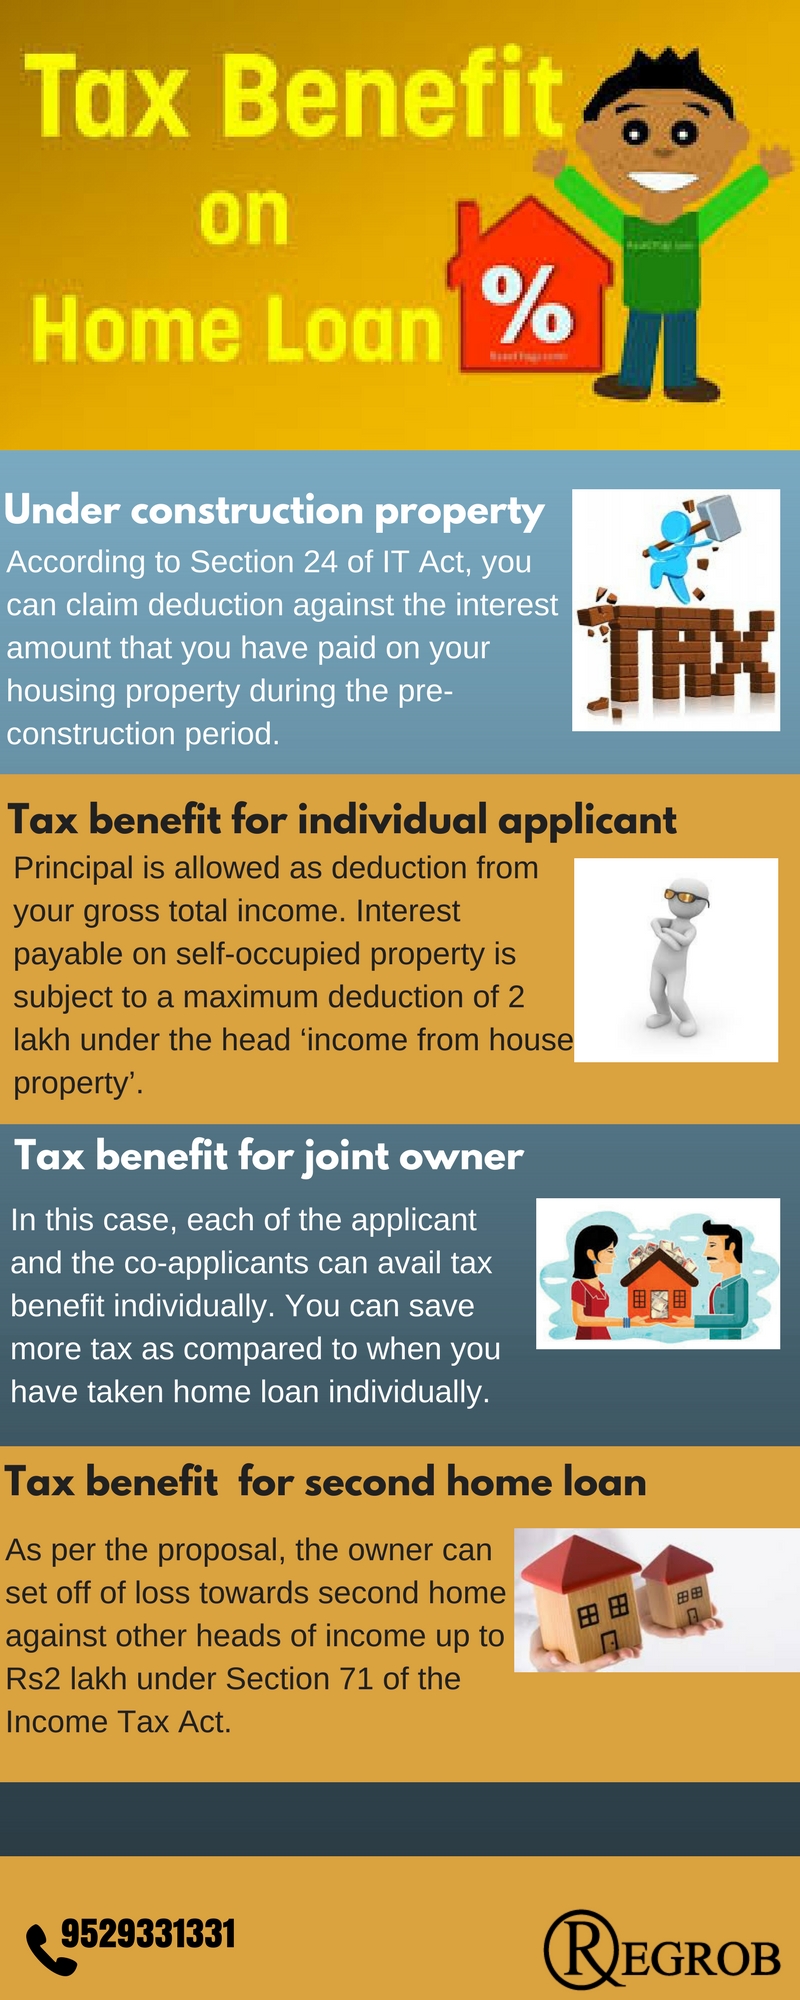 tax-benefits-on-home-loan-in-india-regrob